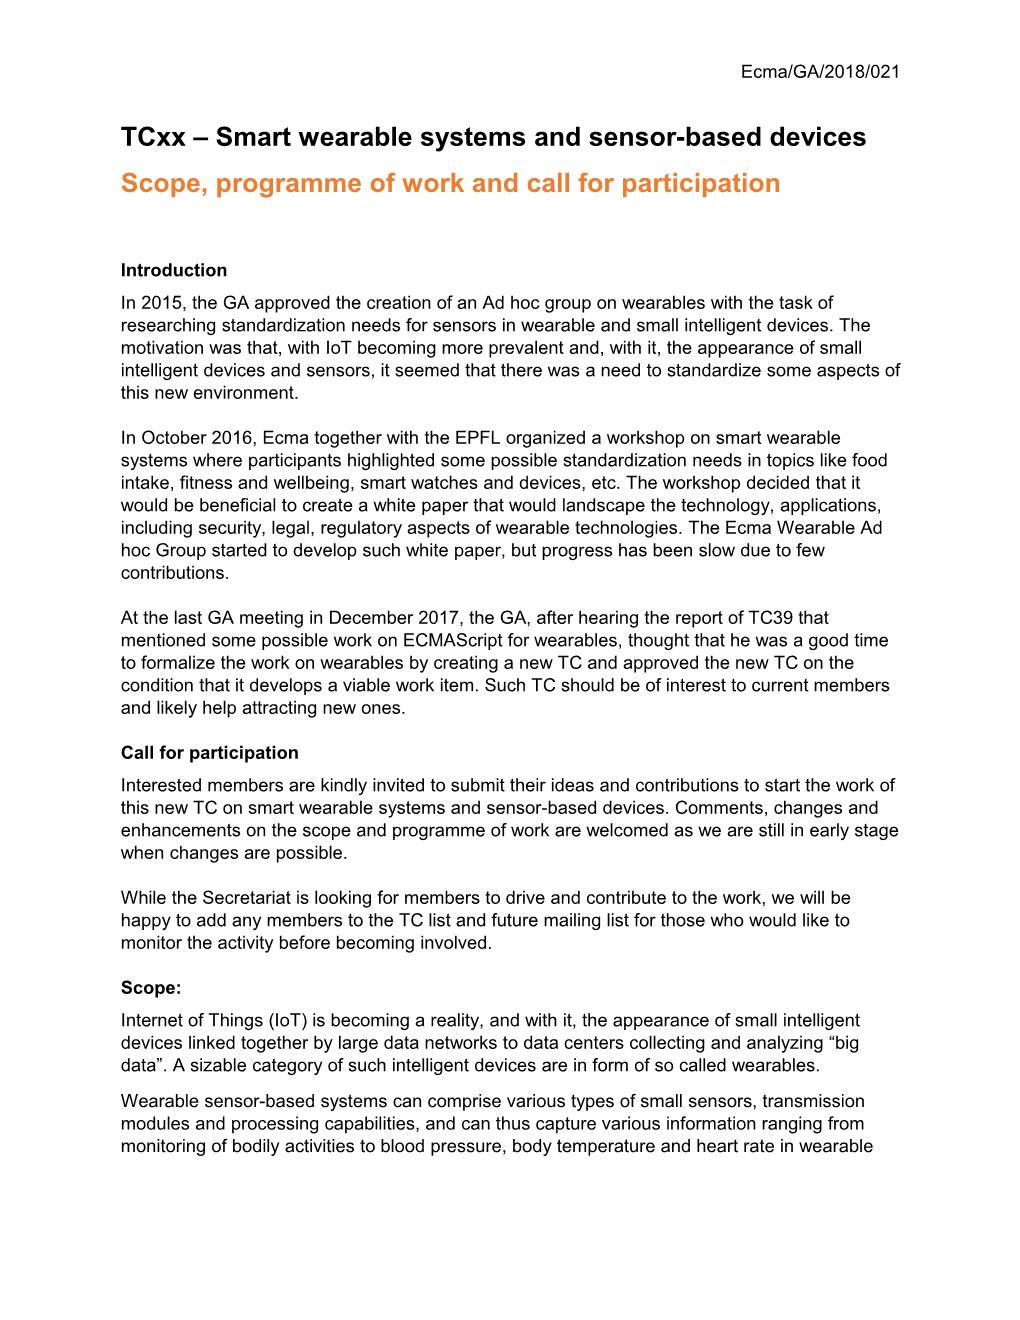 Scope, Programme of Work and Call for Participation for New TC on Smart Wearable Systems